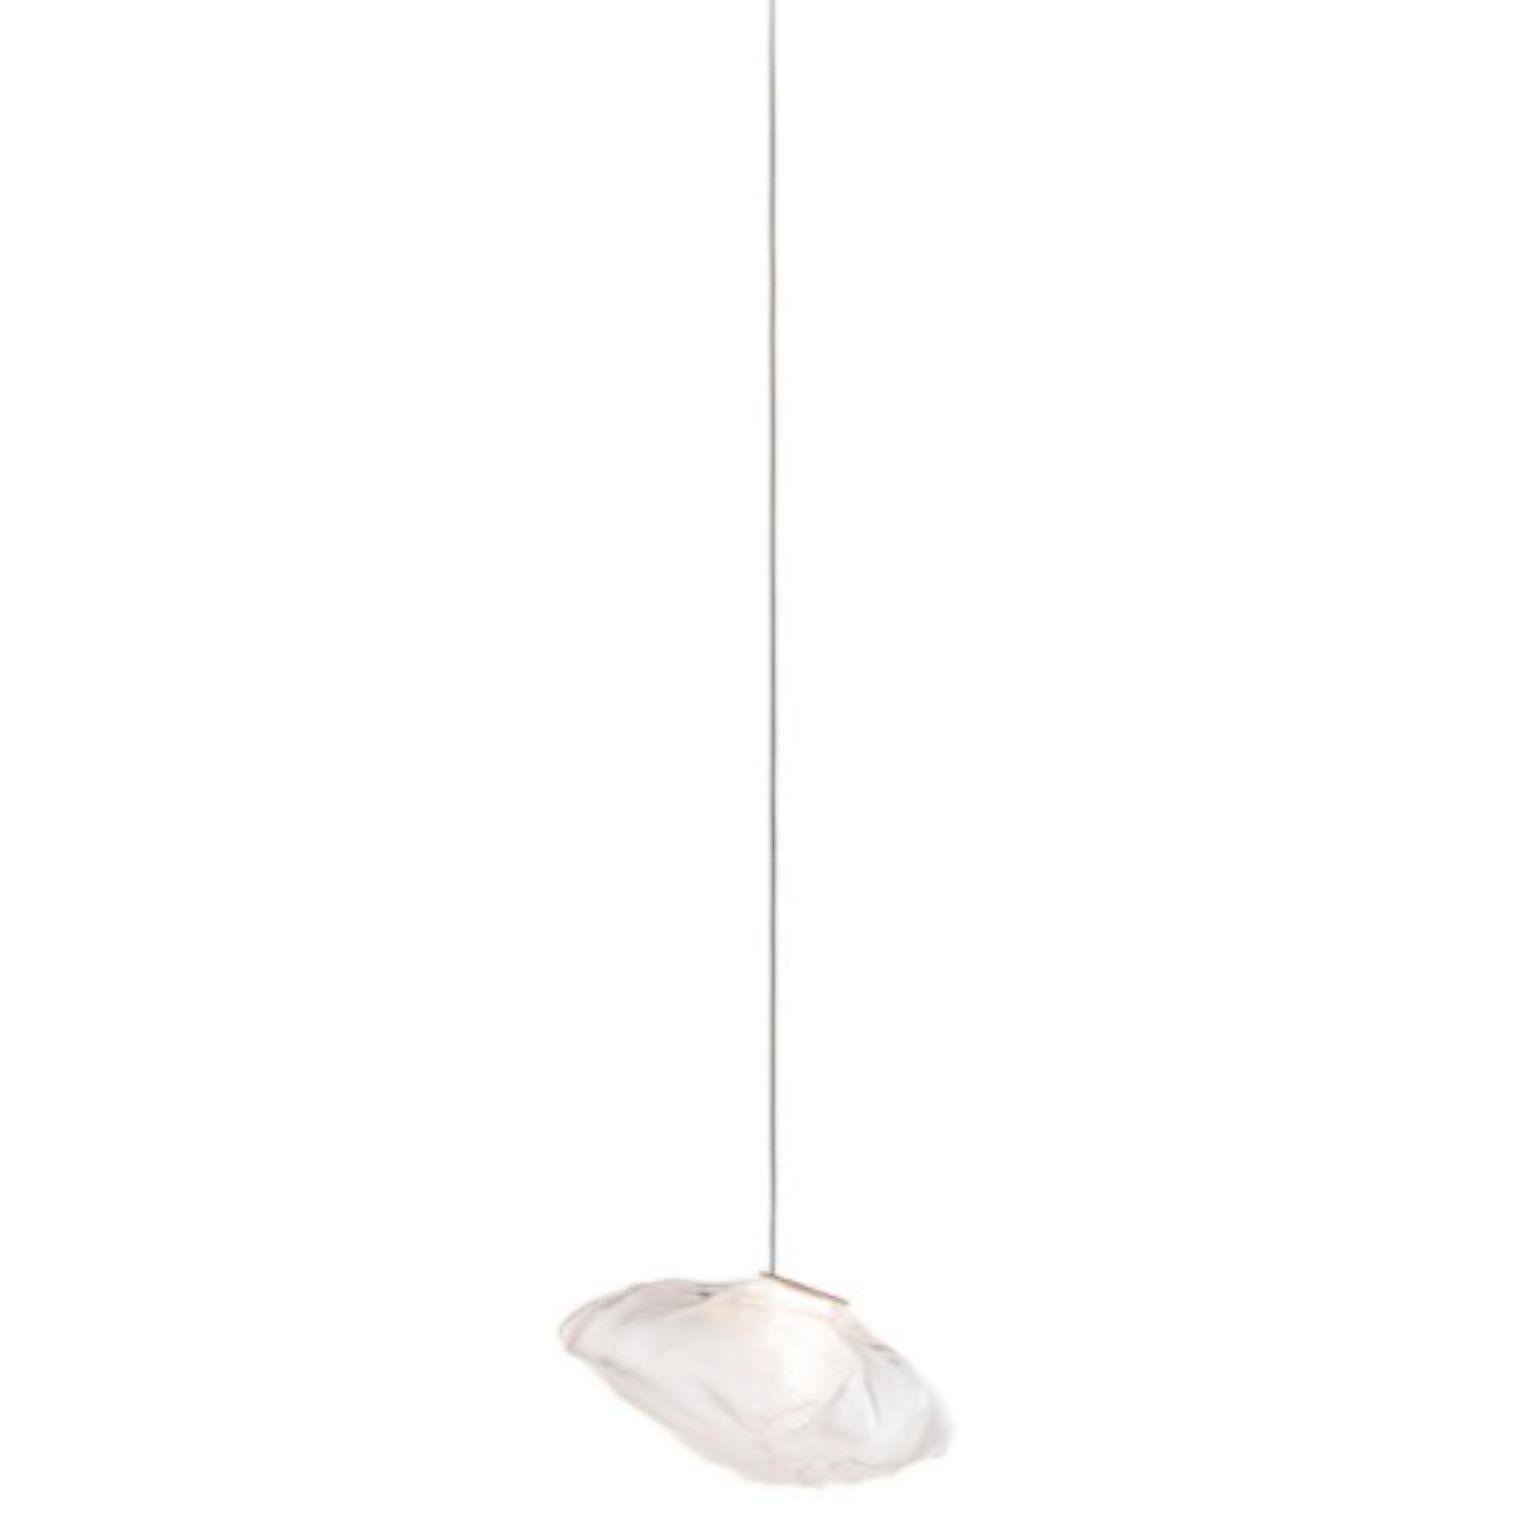 73.1 pendant by Bocci.
Dimensions: D 11.6 x H 300 cm.
Materials: brushed nickel round canopy
Weight: 2.7 kg
White canopy also available.
Due to the handcrafted nature of the 73 series, the pendant size as well as colour depth and tonality will